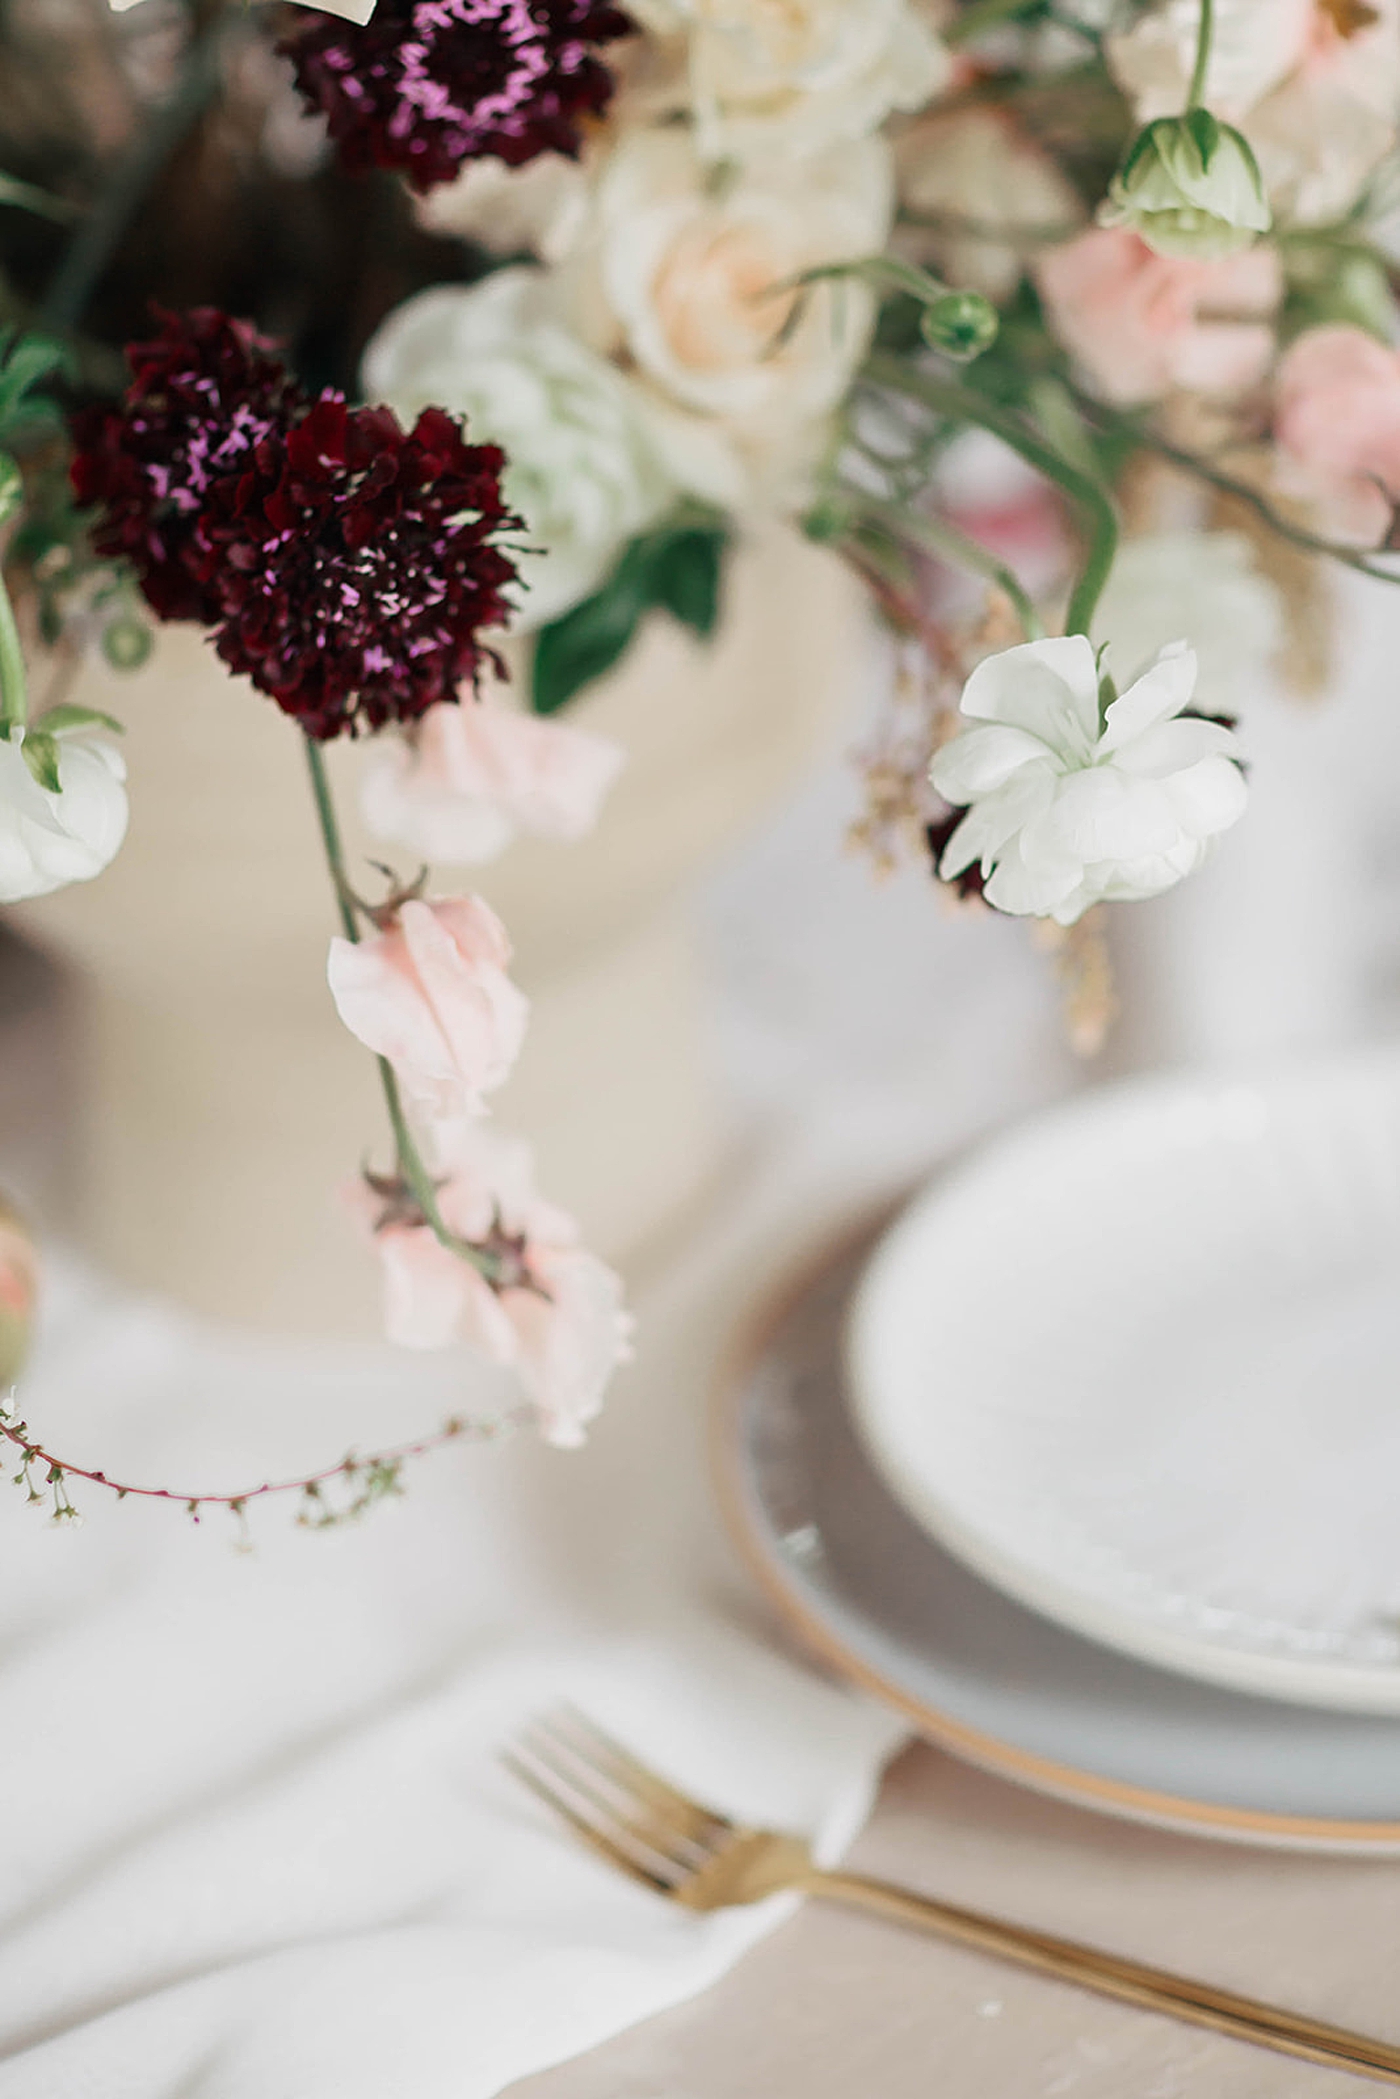 Details of wedding flowers on a table | Carters Event Co